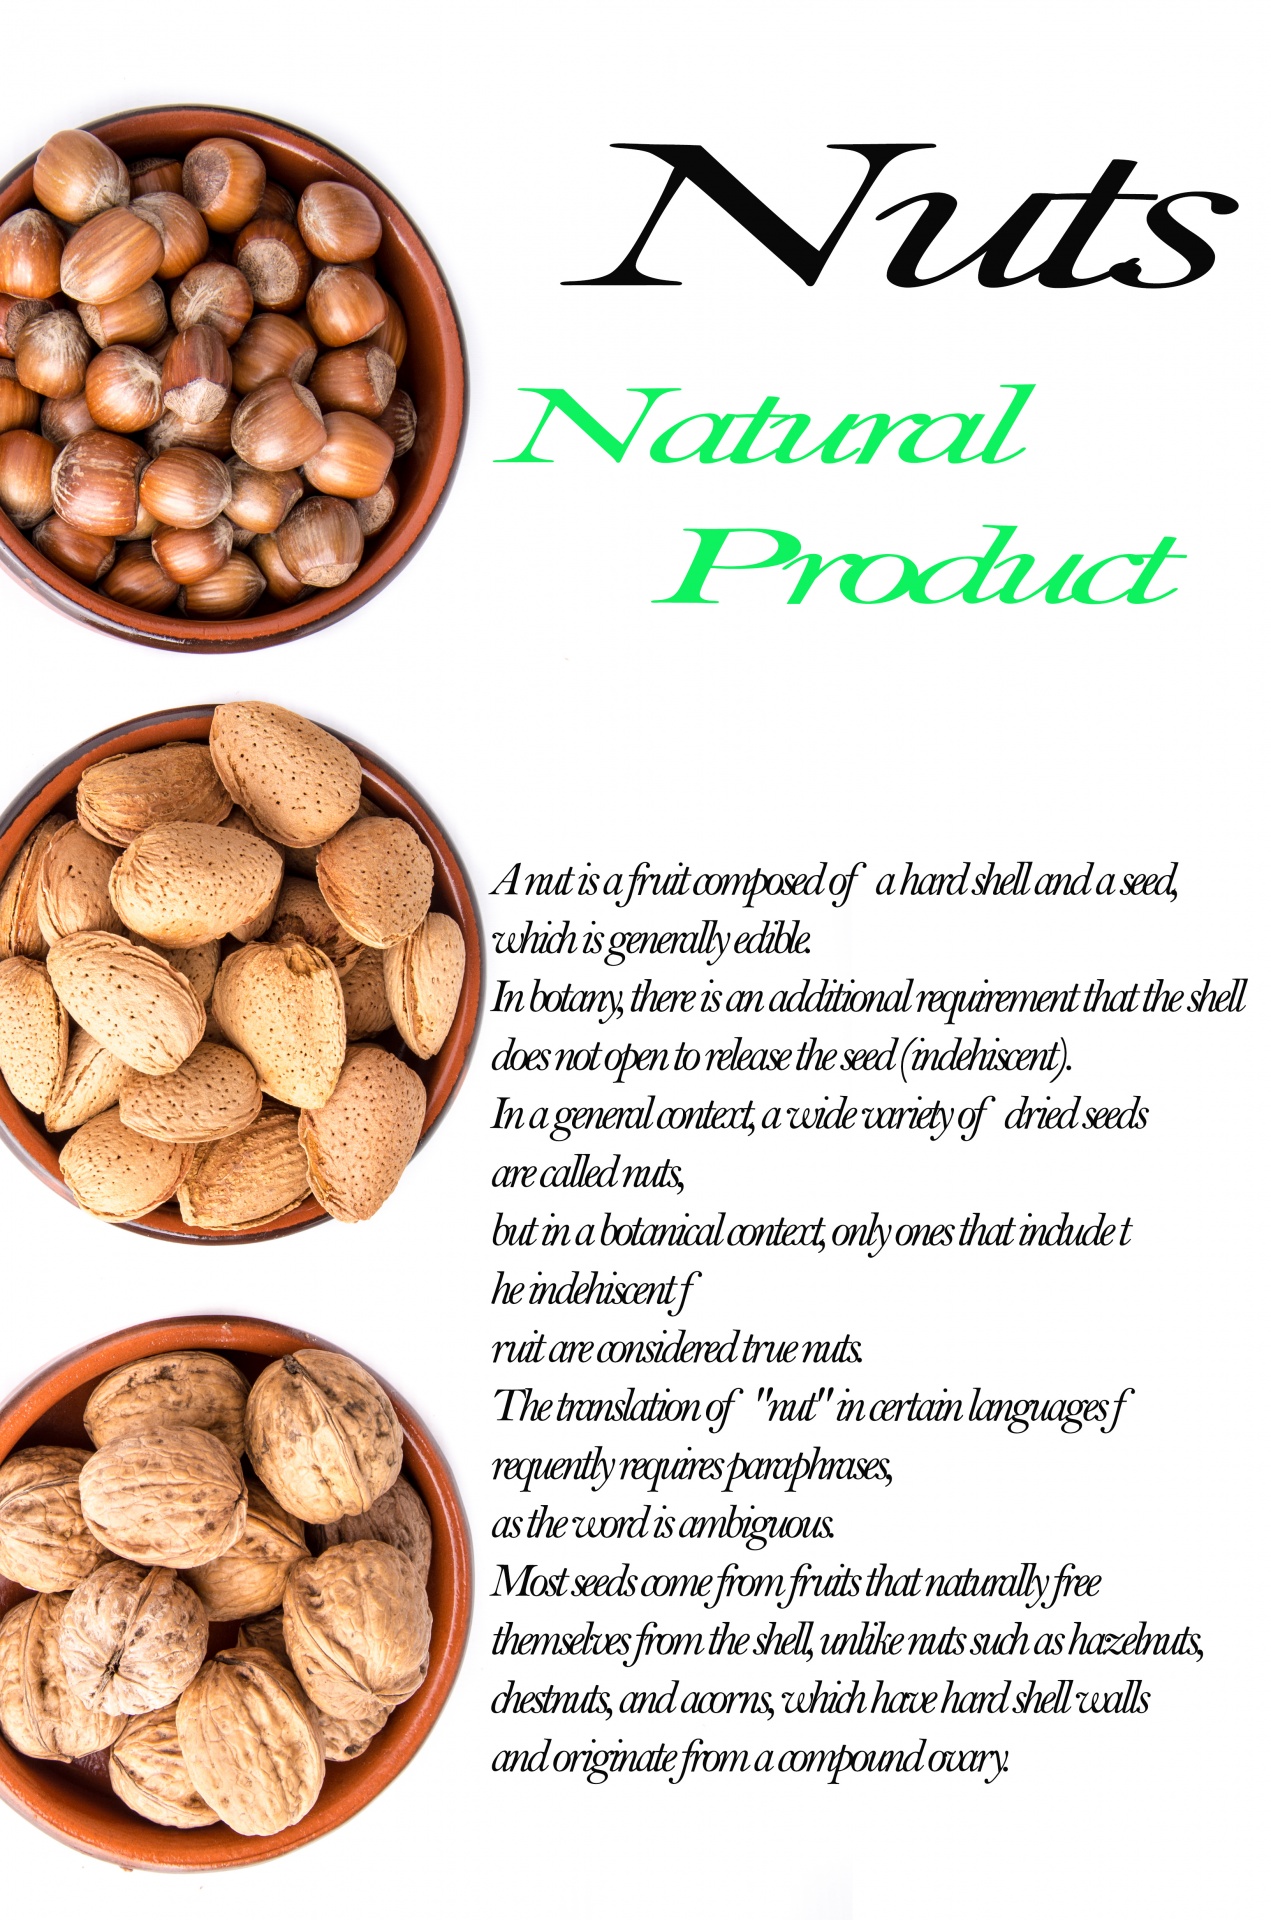 Nuts isolated on the white background, poster